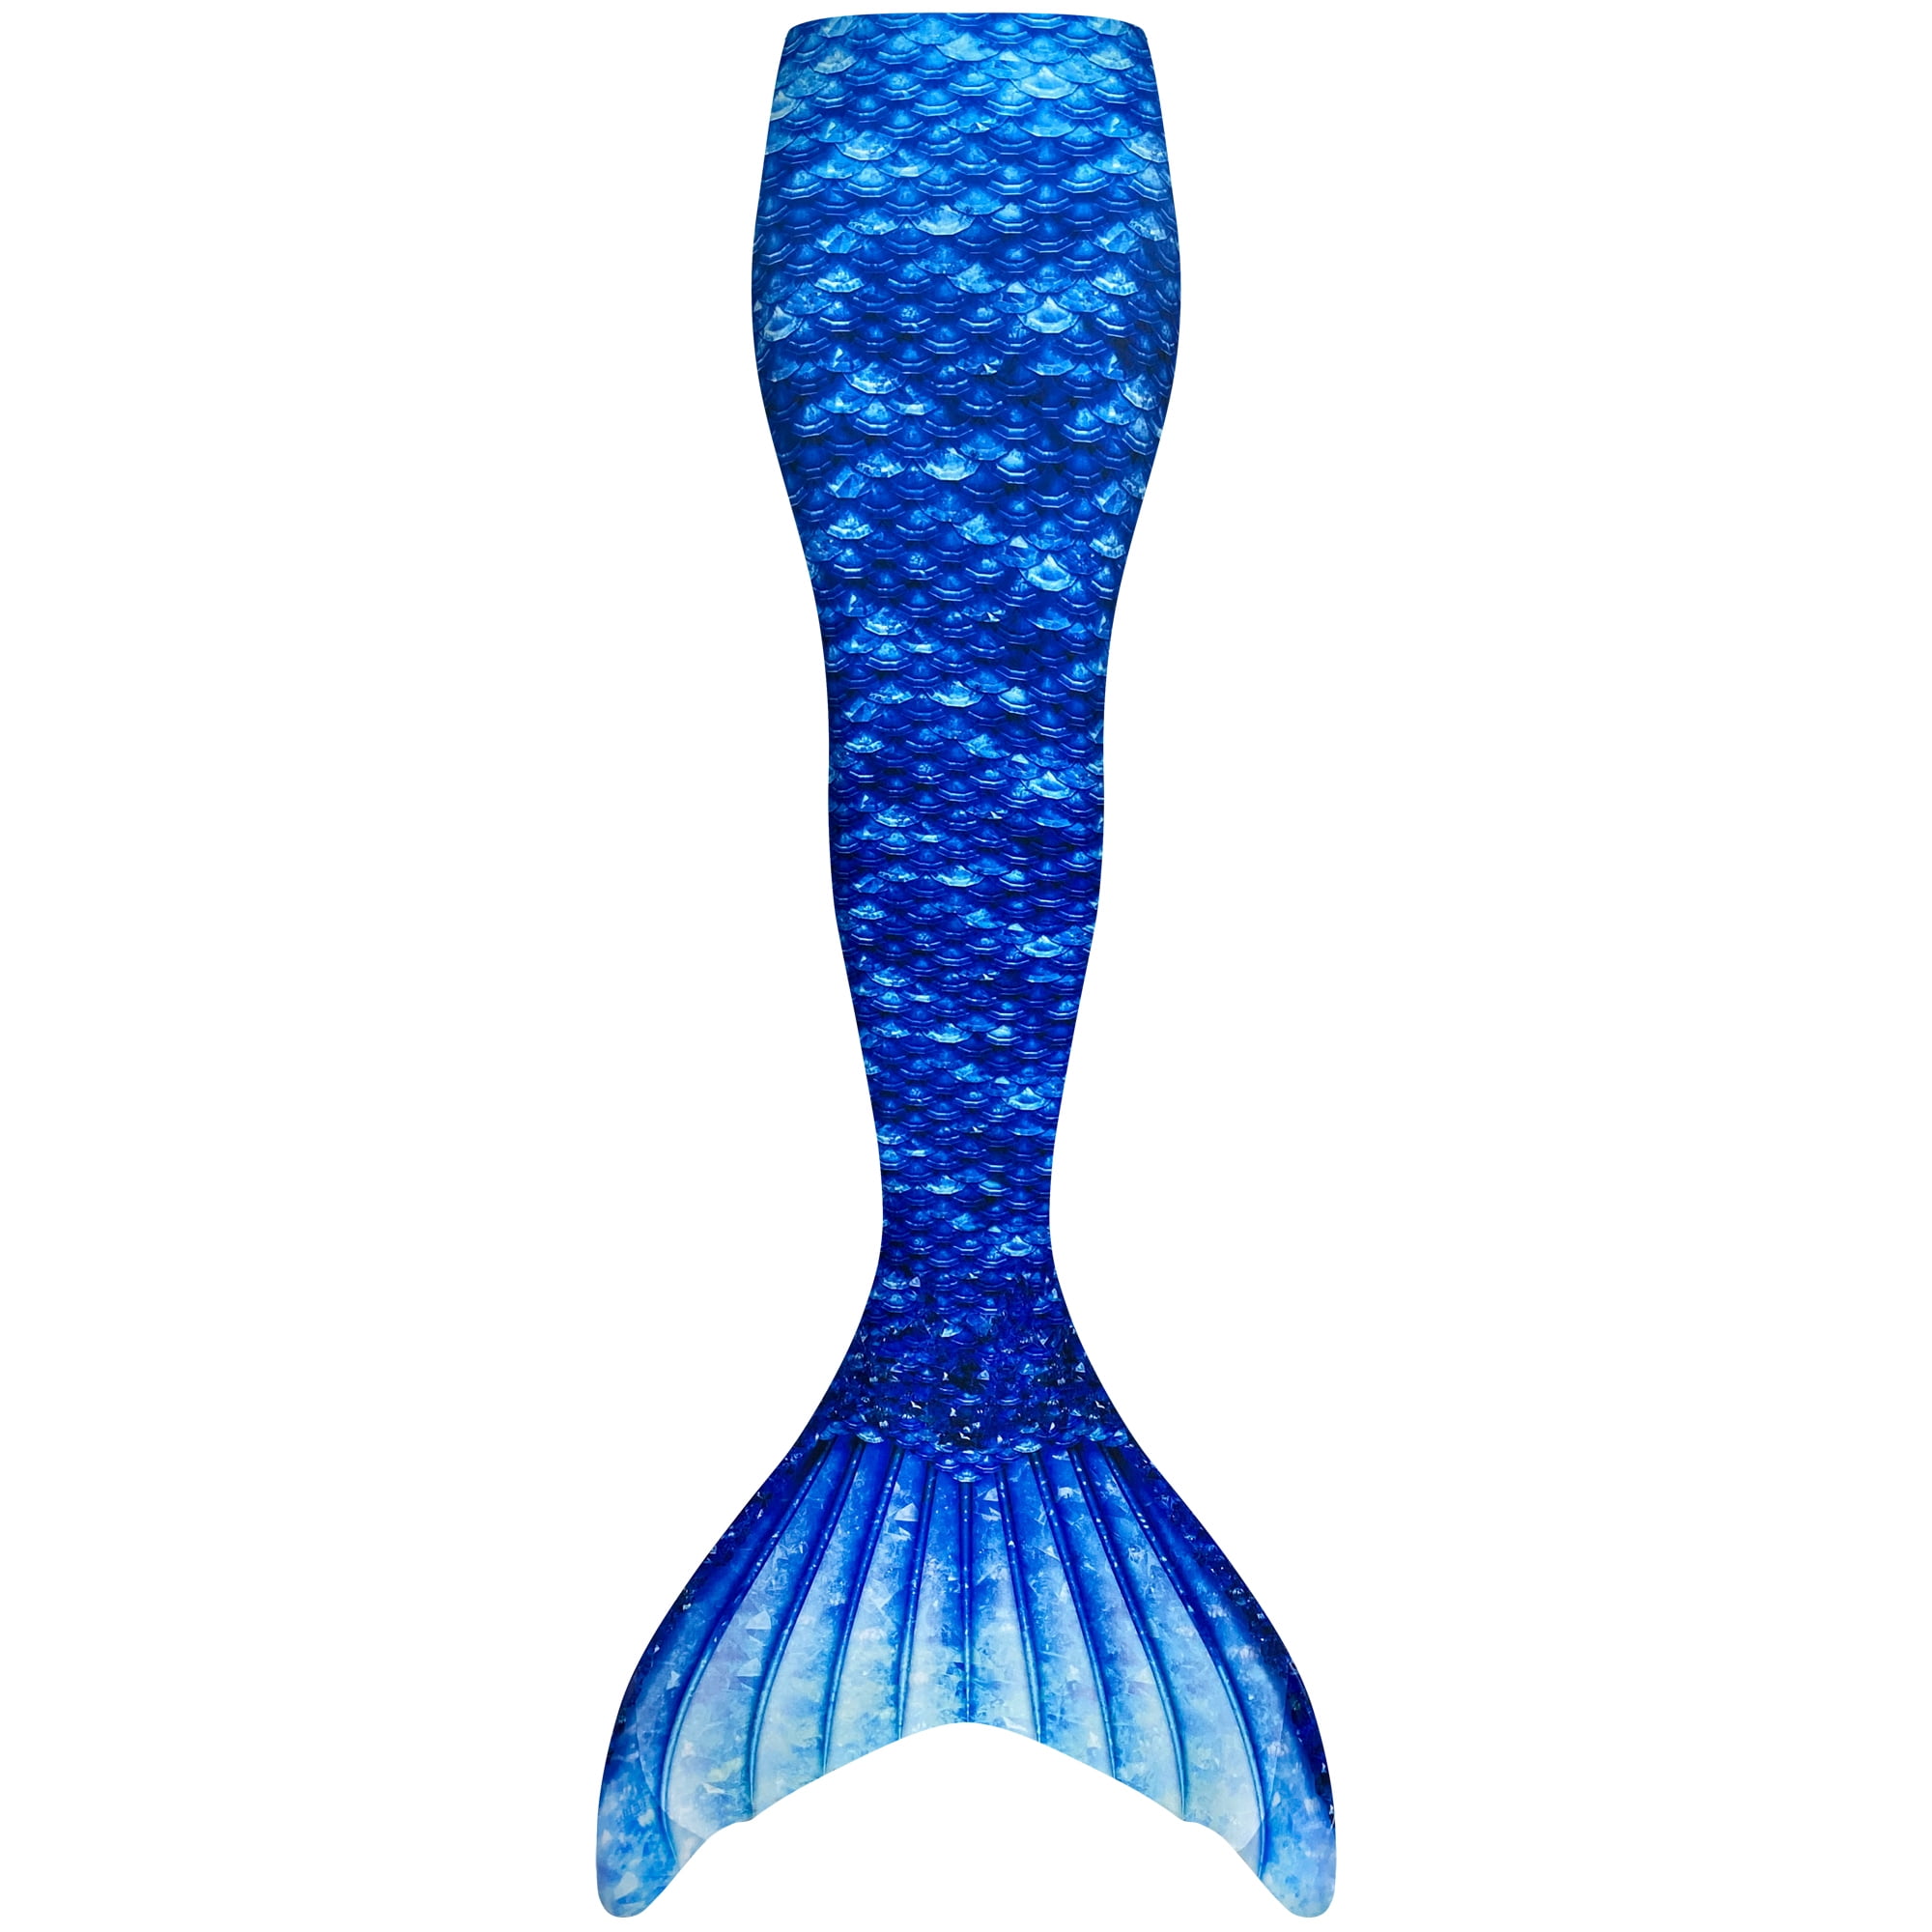 Child 12 NO Monofin Bali Breeze Fin Fun Mermaid Tail Only Reinforced Tips 